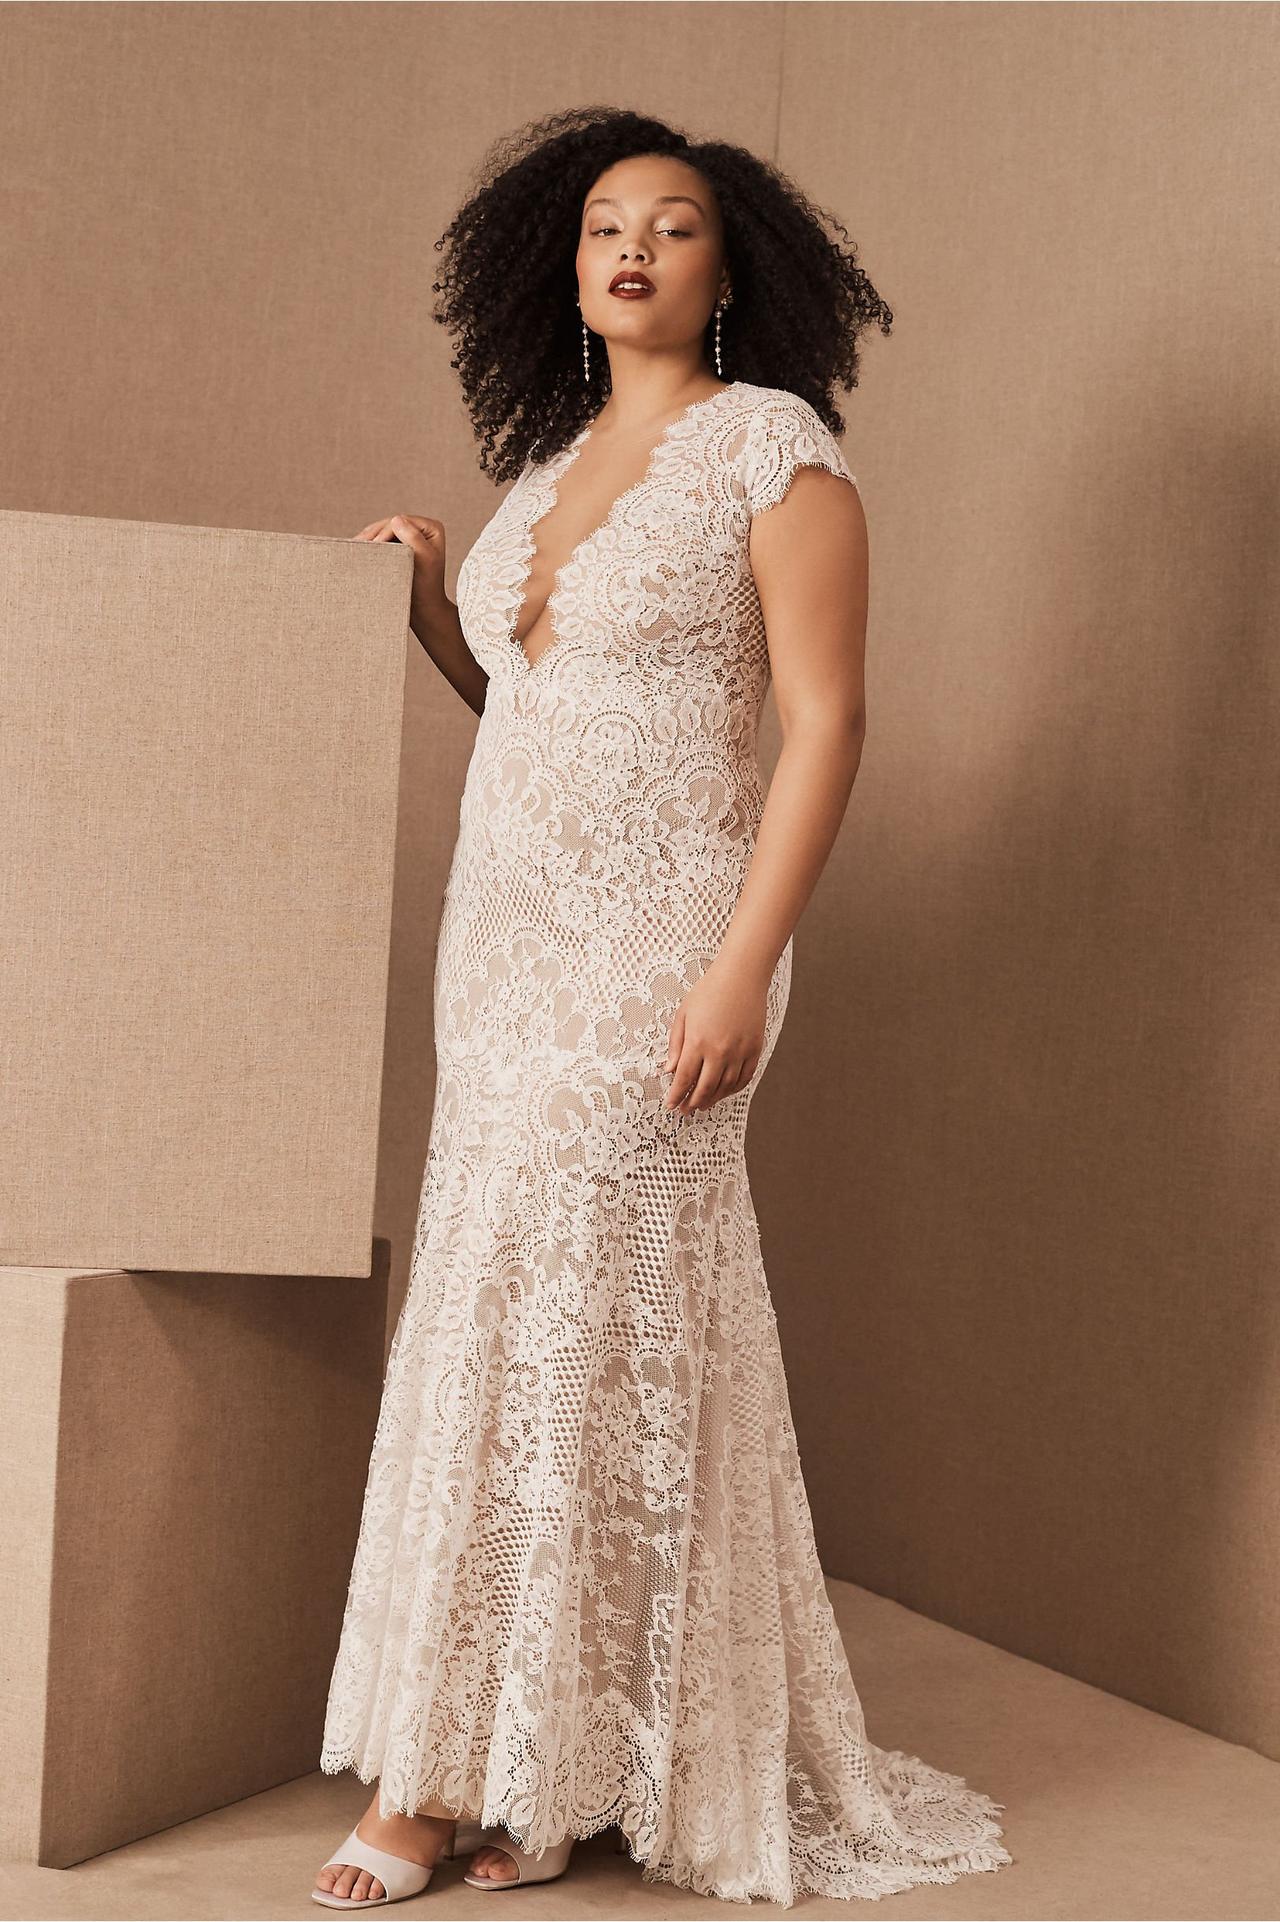 Best Civil Ceremony Wedding Dresses and Bridal Outfits